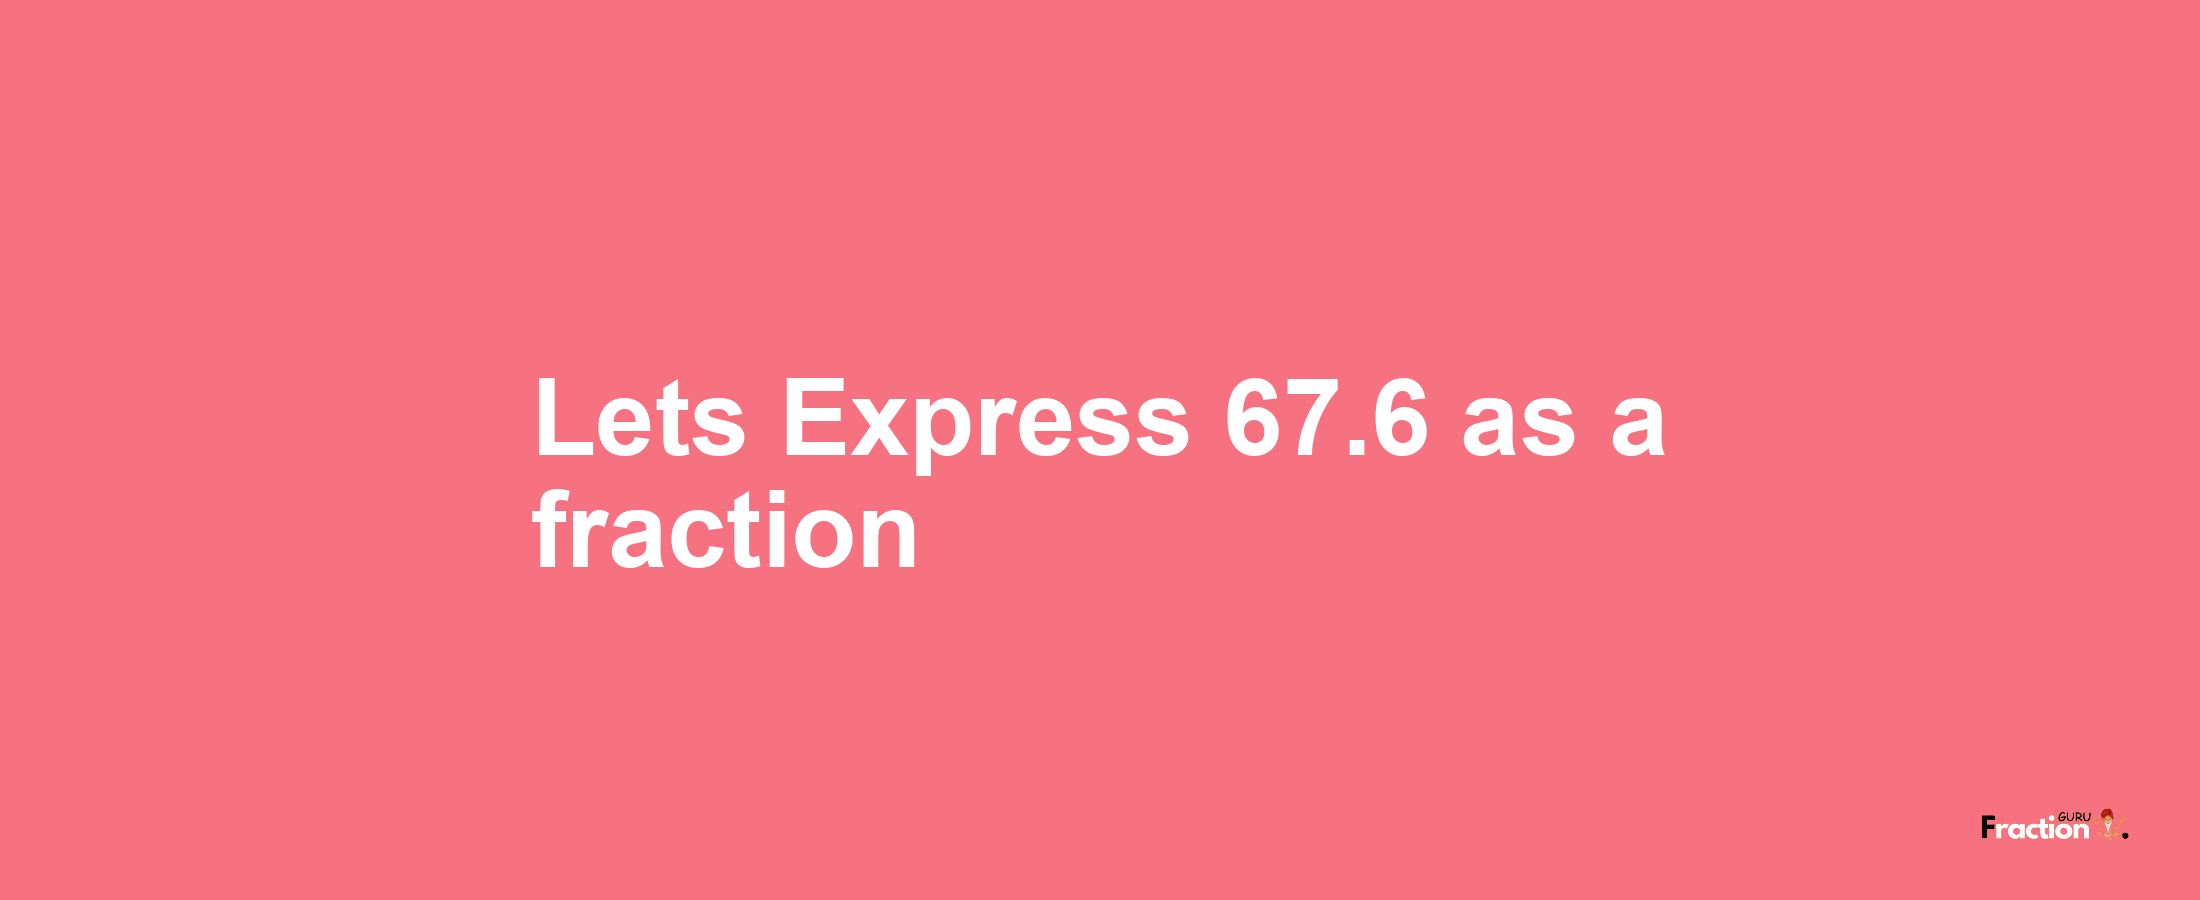 Lets Express 67.6 as afraction